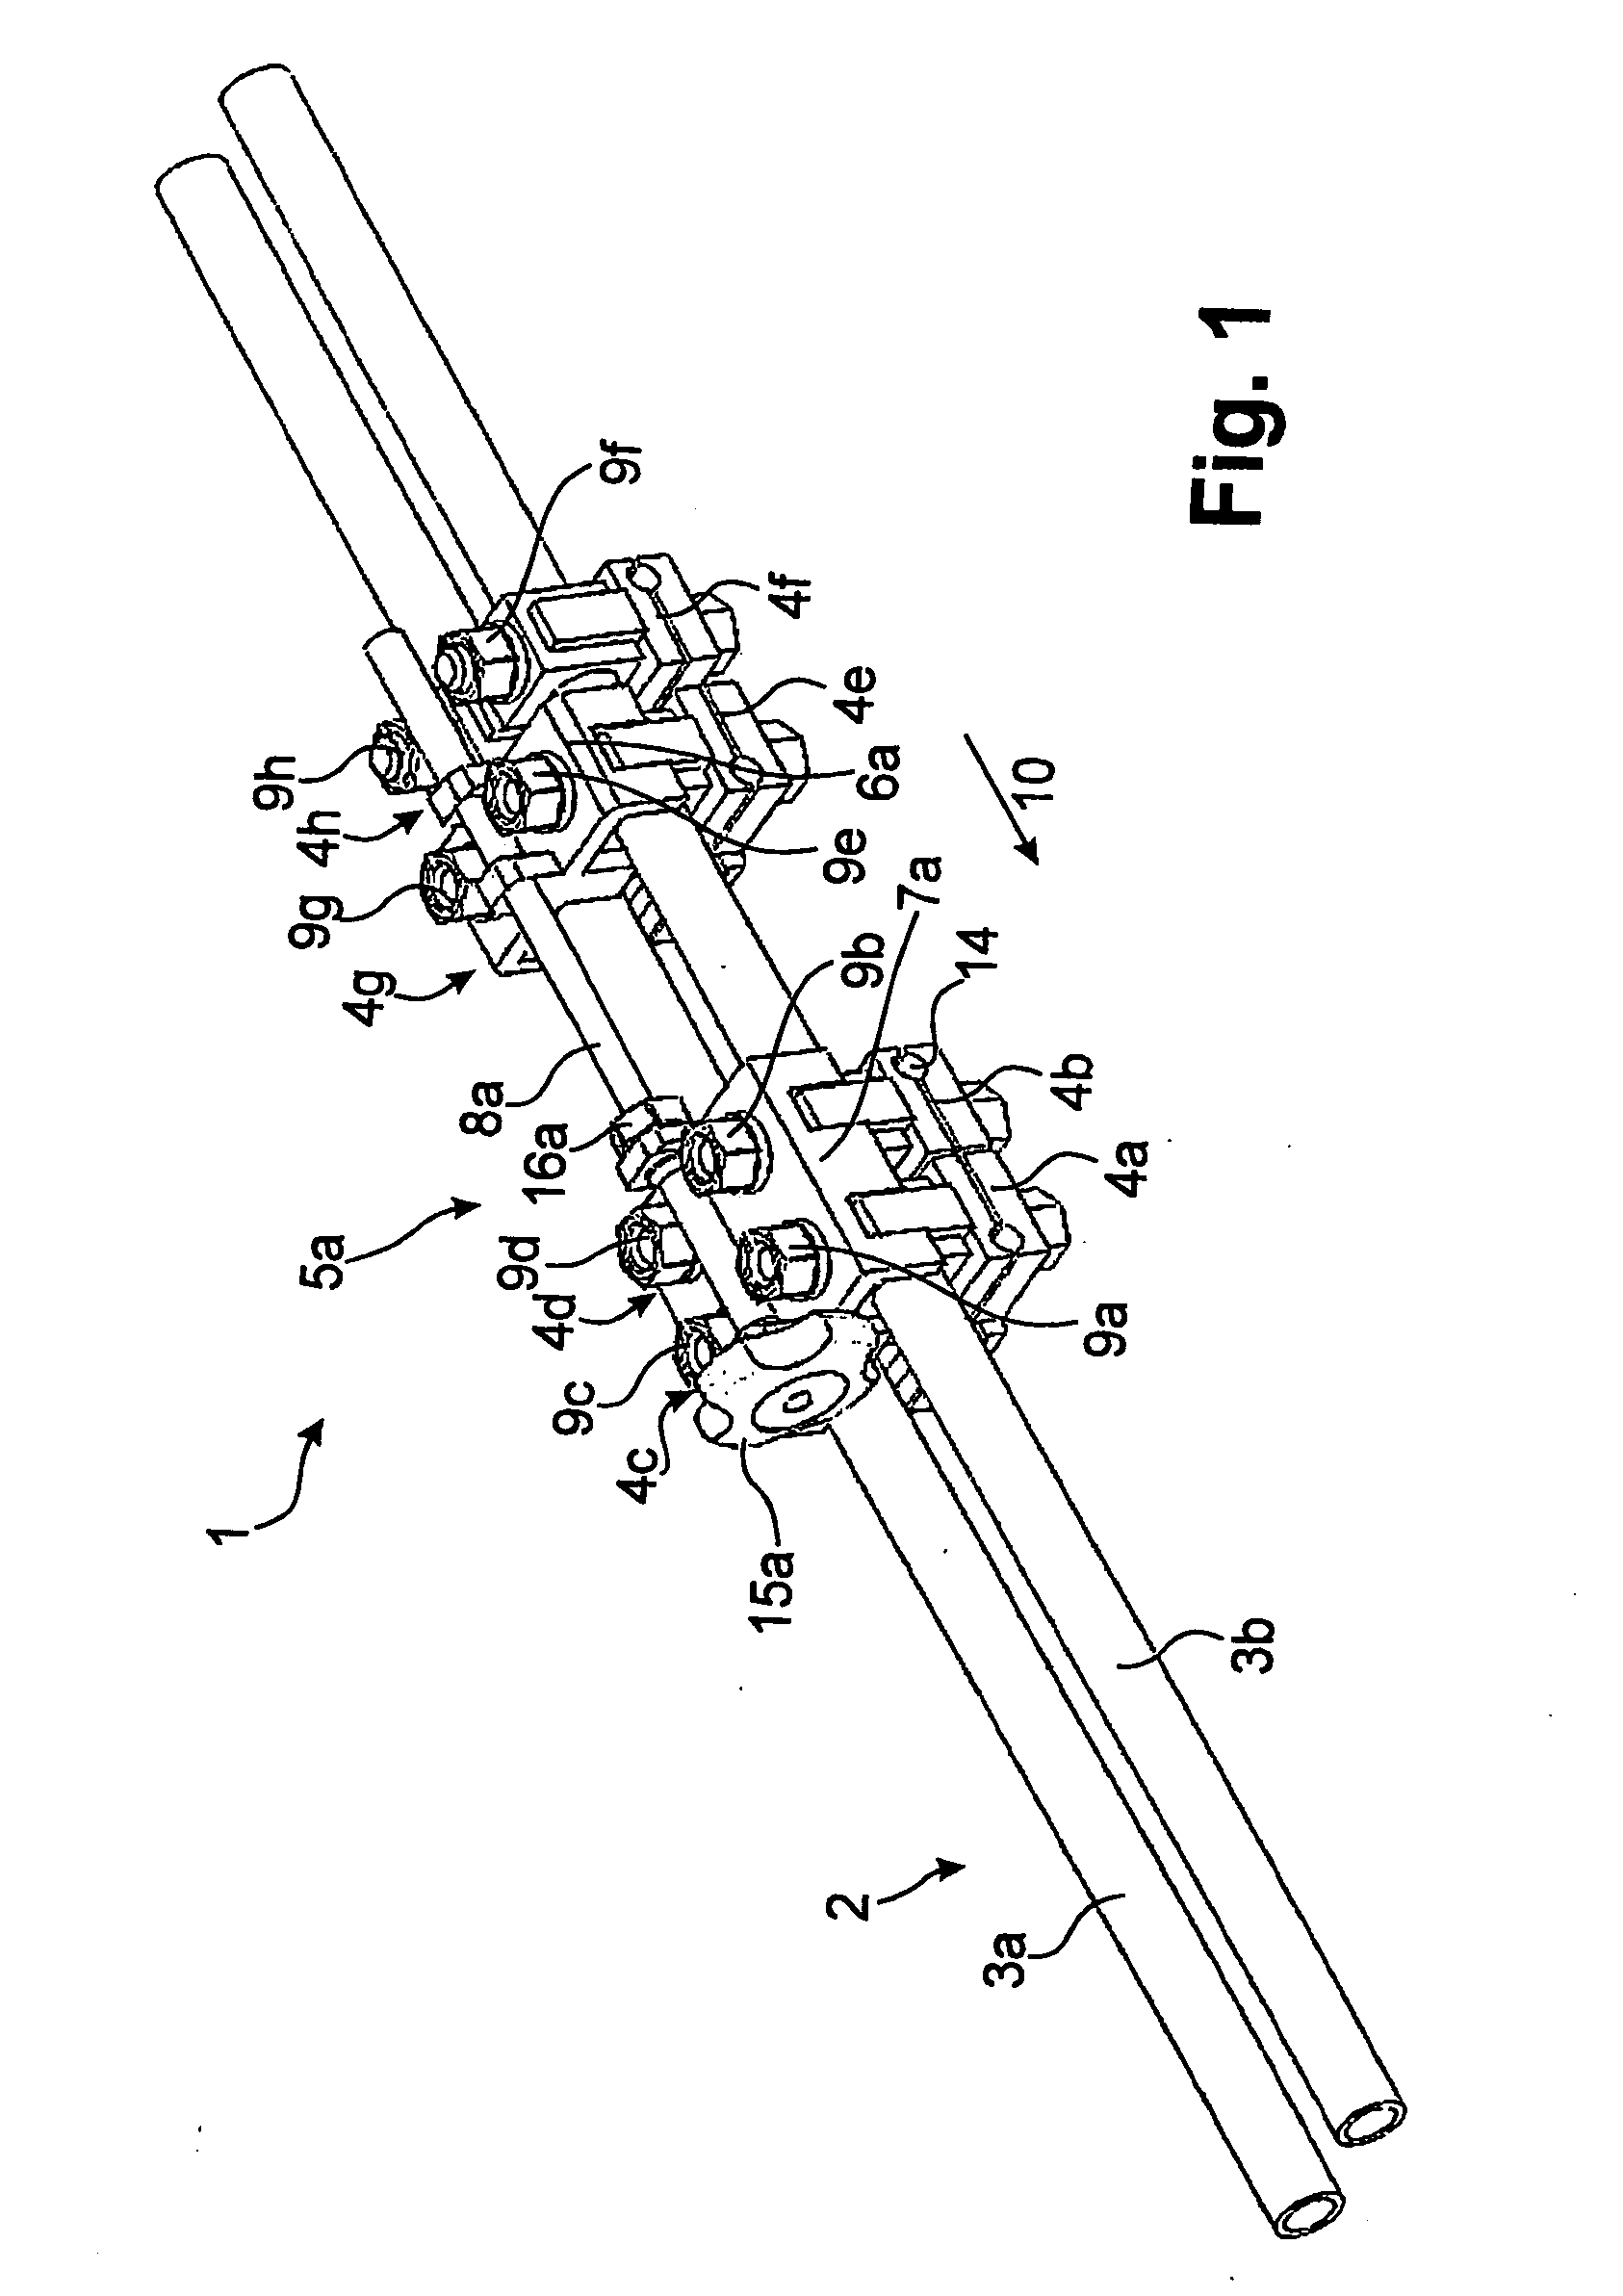 External fixation device for osteosynthesis